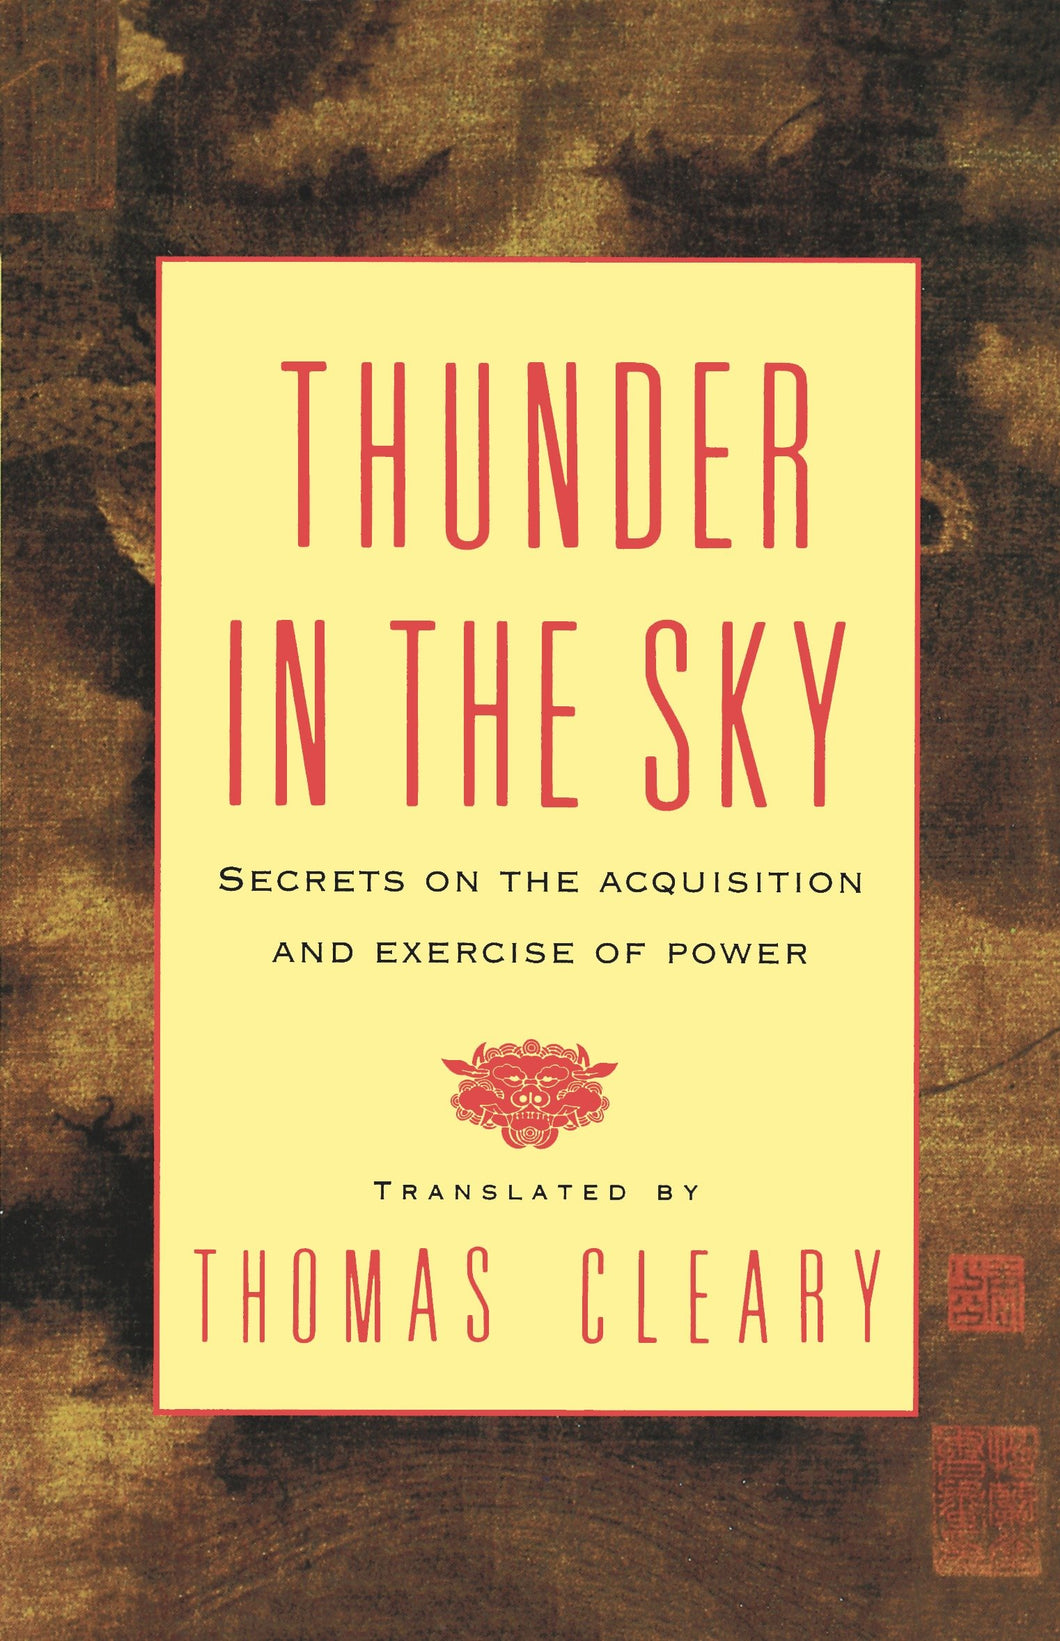 Thunder in the Sky: Secrets on the Acquisition and Exercise of Power